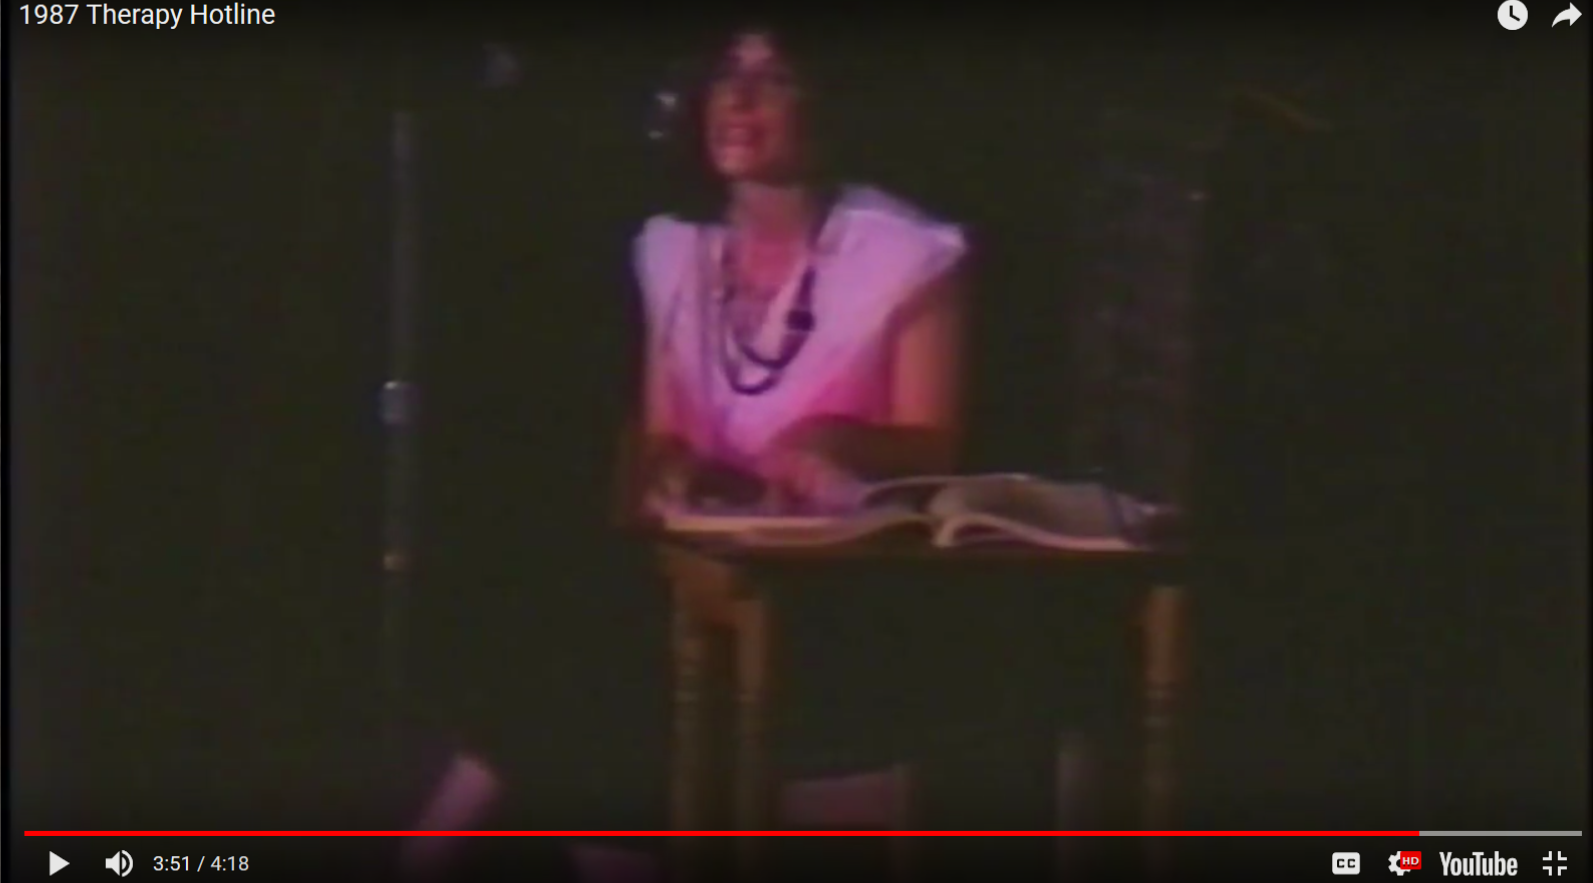 Screenshot of a youtube video. Dark stage with seated figure in pink light.